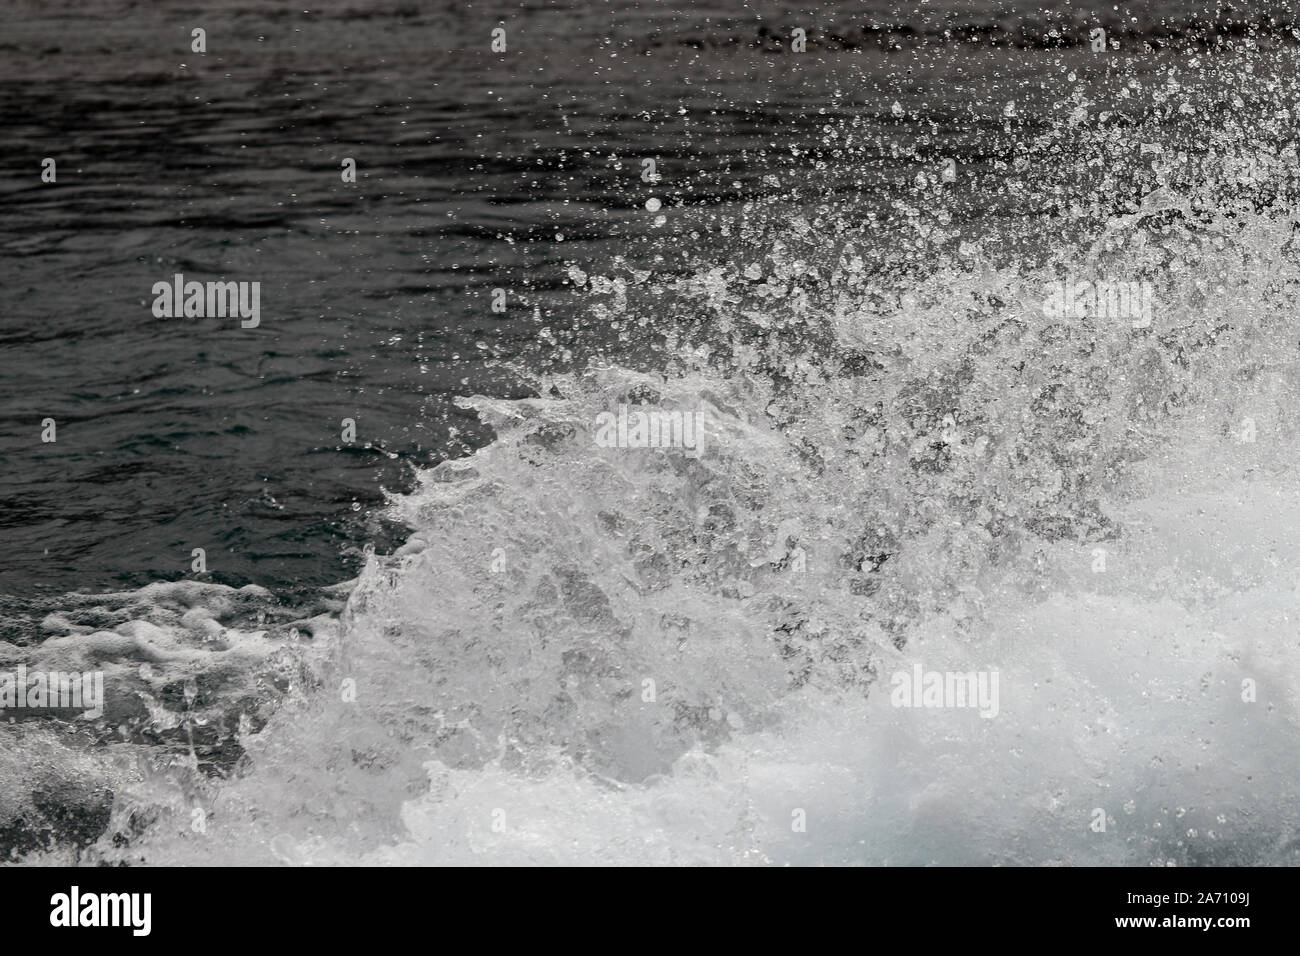 background of a spray of water and water droplets left in the wake of a jet boat Stock Photo